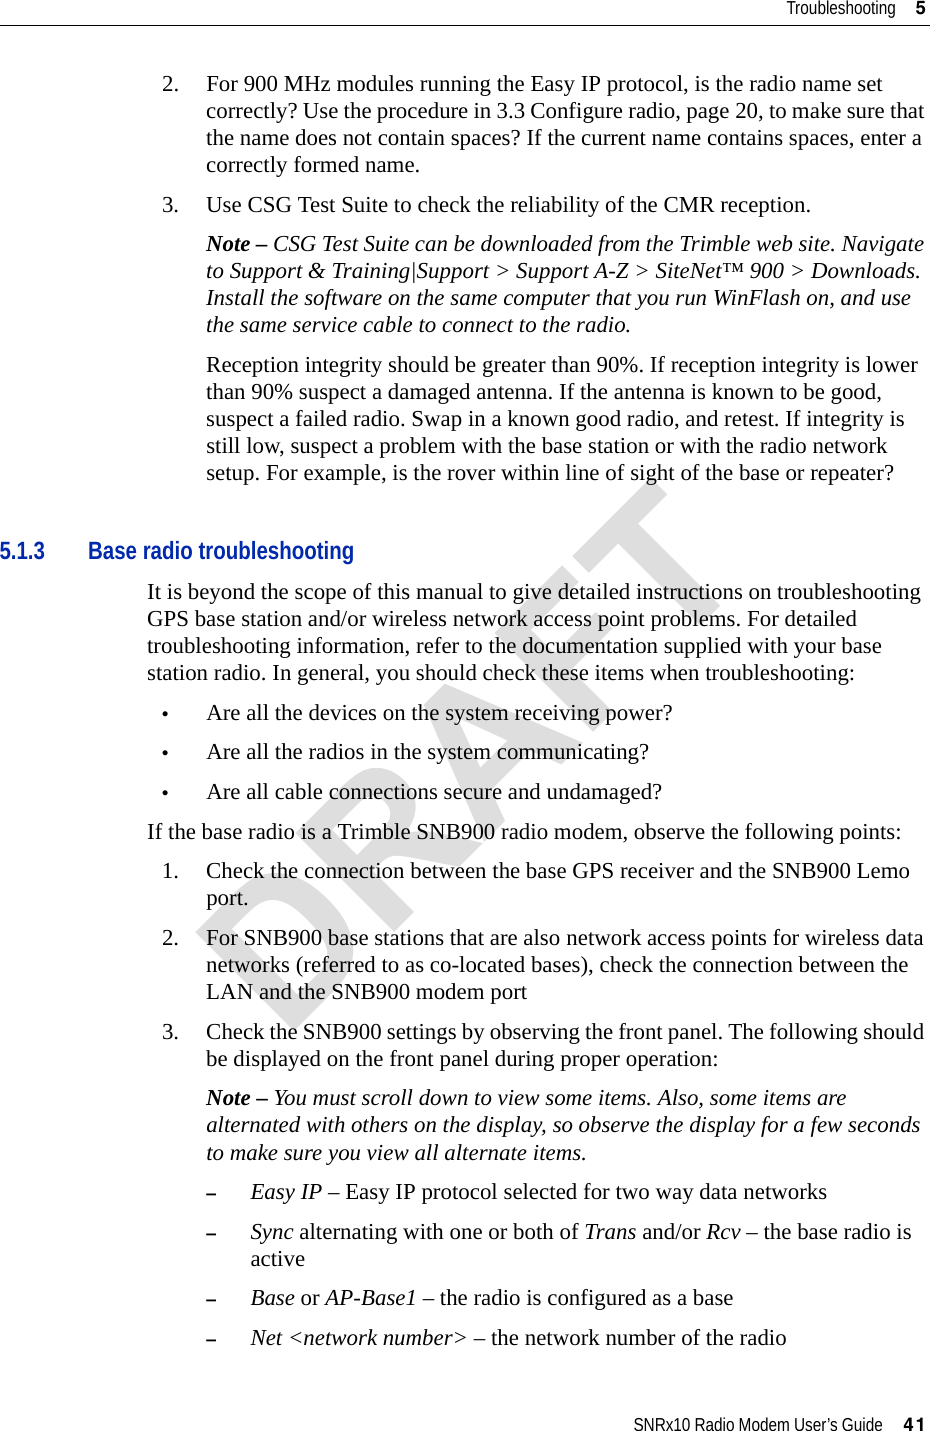 SNRx10 Radio Modem User’s Guide     41Troubleshooting     52. For 900 MHz modules running the Easy IP protocol, is the radio name set correctly? Use the procedure in 3.3 Configure radio, page 20, to make sure that the name does not contain spaces? If the current name contains spaces, enter a correctly formed name.3. Use CSG Test Suite to check the reliability of the CMR reception.Note – CSG Test Suite can be downloaded from the Trimble web site. Navigate to Support &amp; Training|Support &gt; Support A-Z &gt; SiteNet™ 900 &gt; Downloads. Install the software on the same computer that you run WinFlash on, and use the same service cable to connect to the radio.Reception integrity should be greater than 90%. If reception integrity is lower than 90% suspect a damaged antenna. If the antenna is known to be good, suspect a failed radio. Swap in a known good radio, and retest. If integrity is still low, suspect a problem with the base station or with the radio network setup. For example, is the rover within line of sight of the base or repeater?5.1.3 Base radio troubleshootingIt is beyond the scope of this manual to give detailed instructions on troubleshooting GPS base station and/or wireless network access point problems. For detailed troubleshooting information, refer to the documentation supplied with your base station radio. In general, you should check these items when troubleshooting:•Are all the devices on the system receiving power?•Are all the radios in the system communicating?•Are all cable connections secure and undamaged?If the base radio is a Trimble SNB900 radio modem, observe the following points:1. Check the connection between the base GPS receiver and the SNB900 Lemo port.2. For SNB900 base stations that are also network access points for wireless data networks (referred to as co-located bases), check the connection between the LAN and the SNB900 modem port3. Check the SNB900 settings by observing the front panel. The following should be displayed on the front panel during proper operation:Note – You must scroll down to view some items. Also, some items are alternated with others on the display, so observe the display for a few seconds to make sure you view all alternate items.–Easy IP – Easy IP protocol selected for two way data networks–Sync alternating with one or both of Trans and/or Rcv – the base radio is active–Base or AP-Base1 – the radio is configured as a base–Net &lt;network number&gt; – the network number of the radioDRAFT